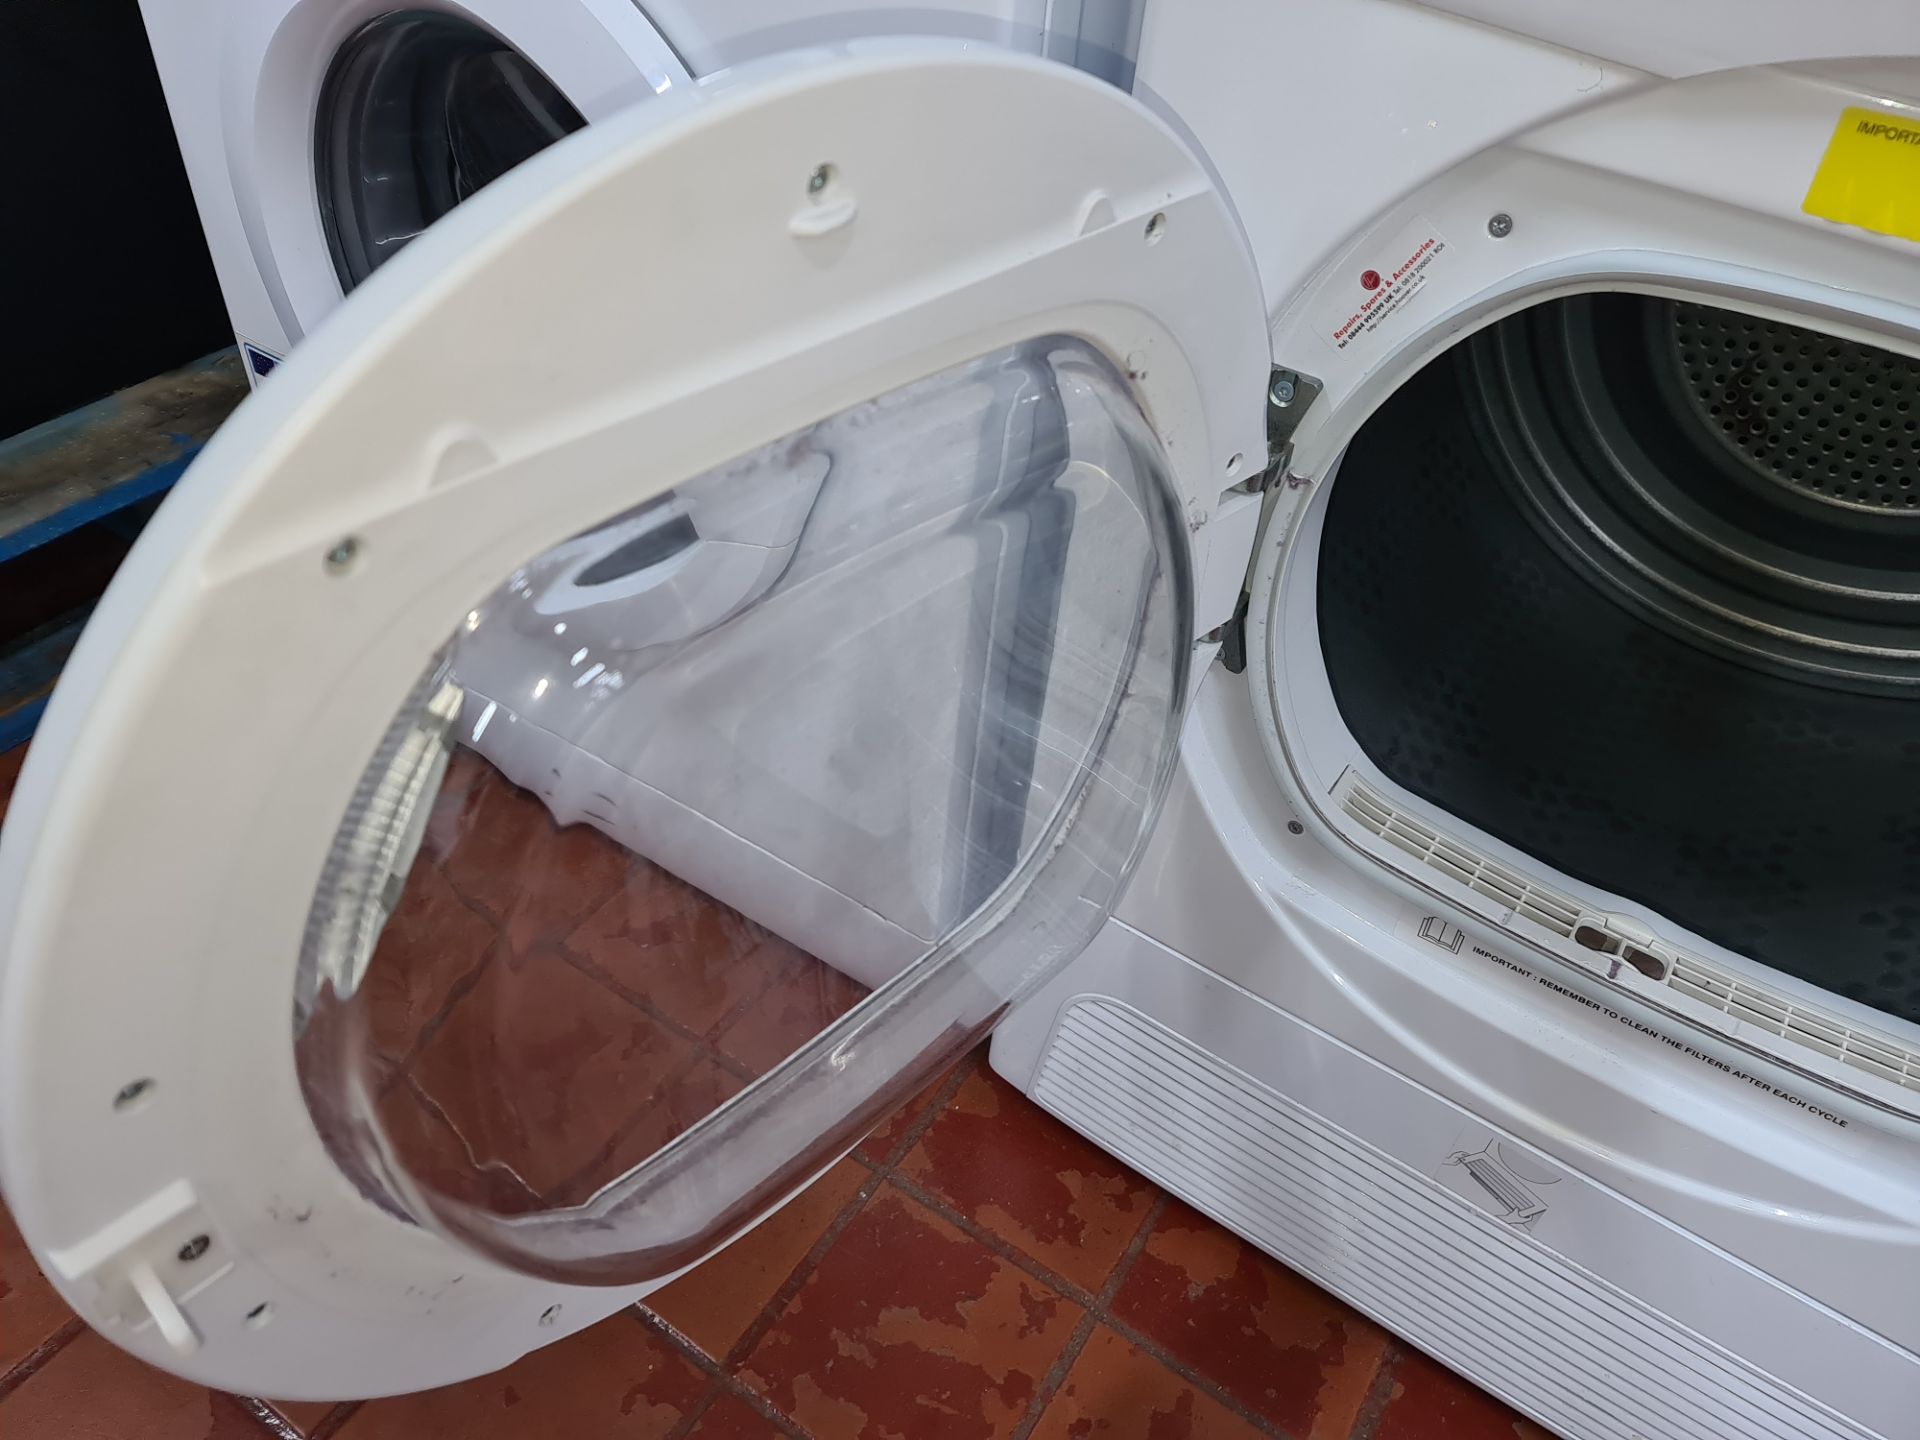 Hoover Vision Tech 9kg Infinity dryer - Image 6 of 6